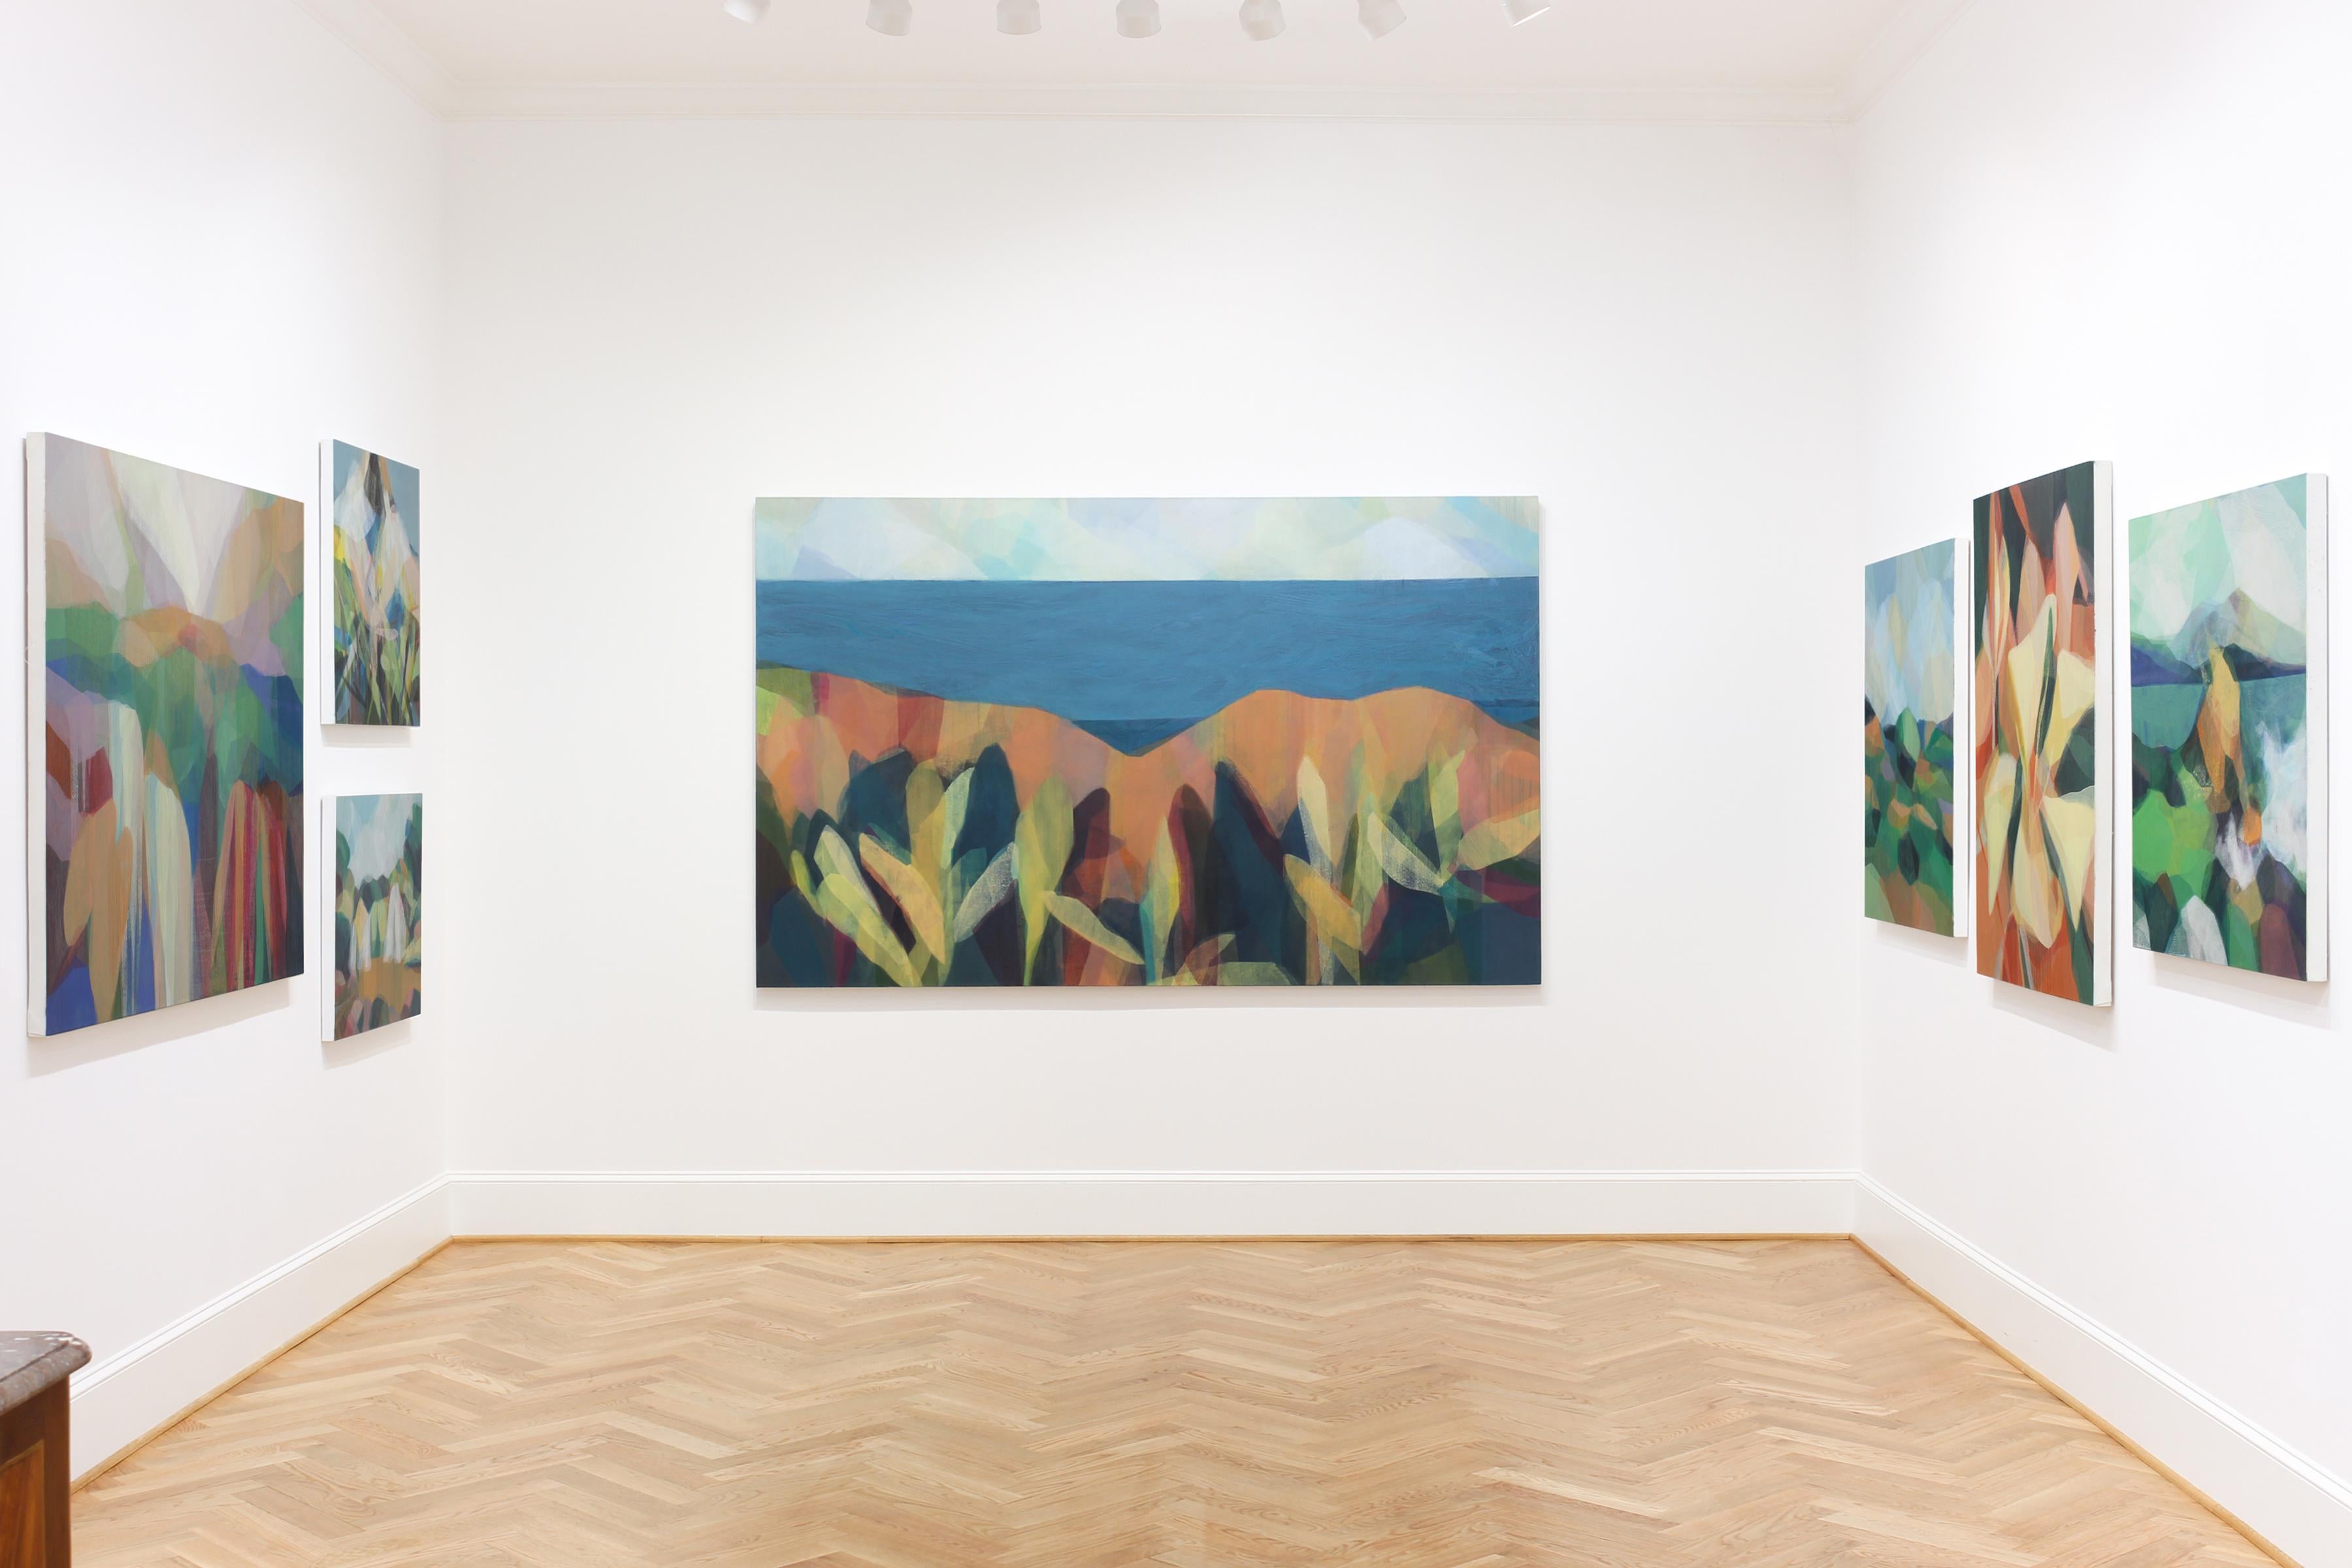 This painting is a large-scale abstract landscape on canvas featuring vibrant layers of yellow, green, orange, red and blue.

Katherine Sandoz is inspired by the work of Helen Frankenthaler, Richard Diebenkorn, Morris Louis, Vincent Van Gogh, Willem